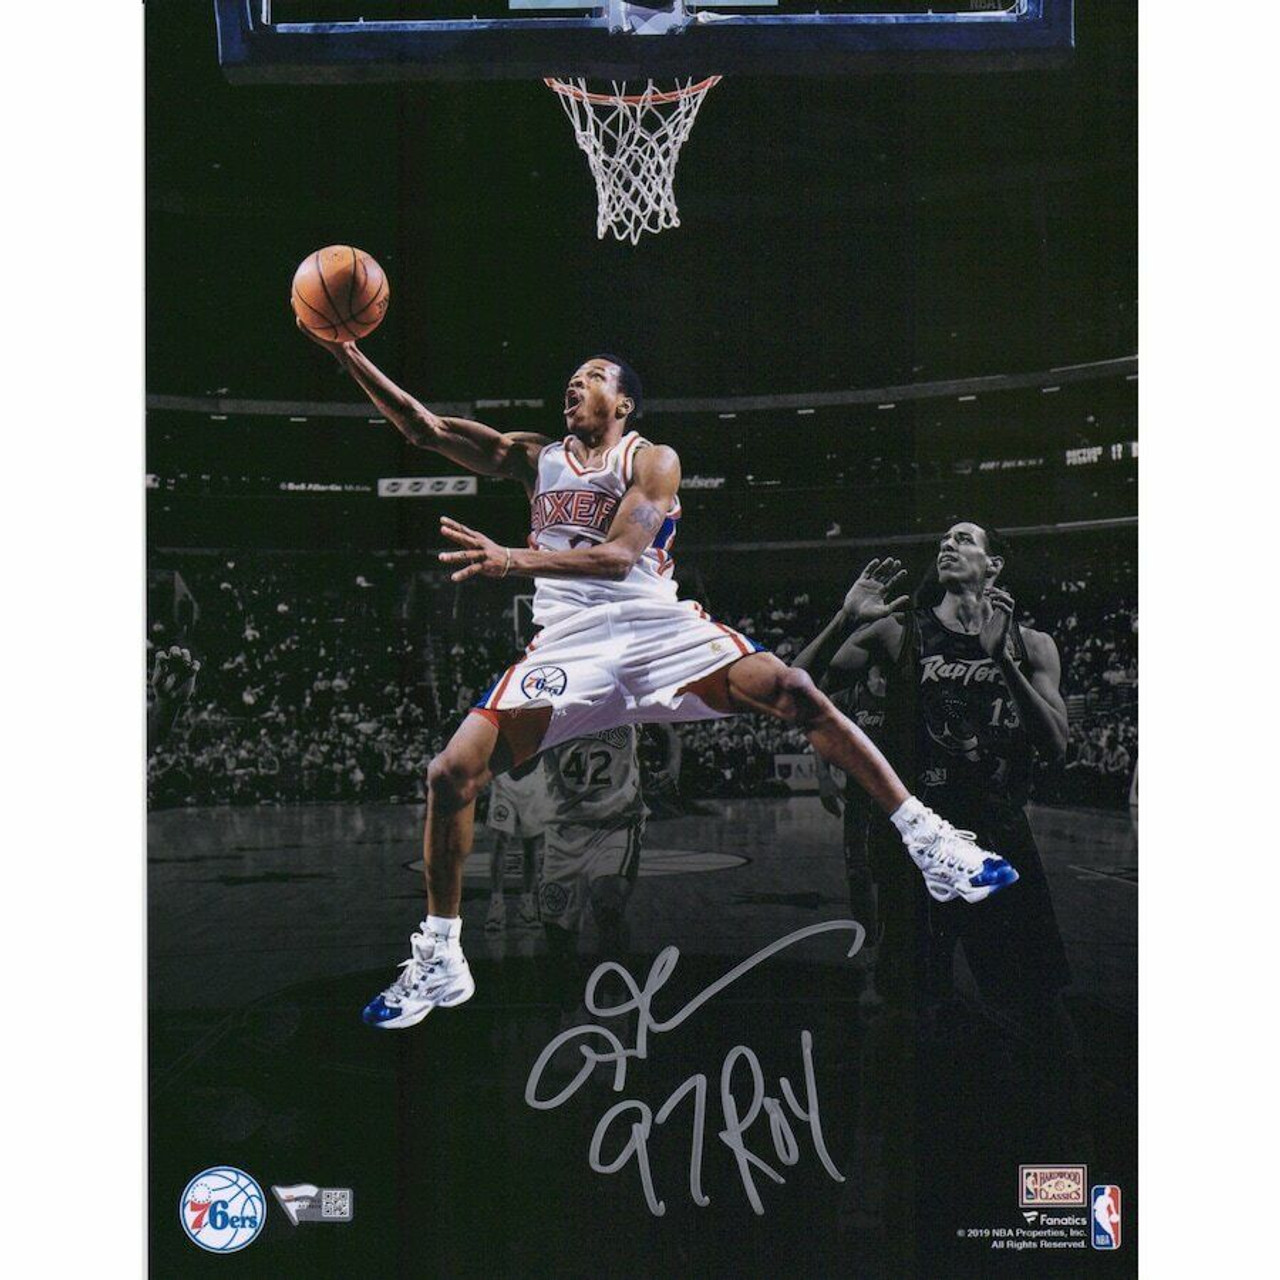 ALLEN IVERSON Autographed and Inscribed 